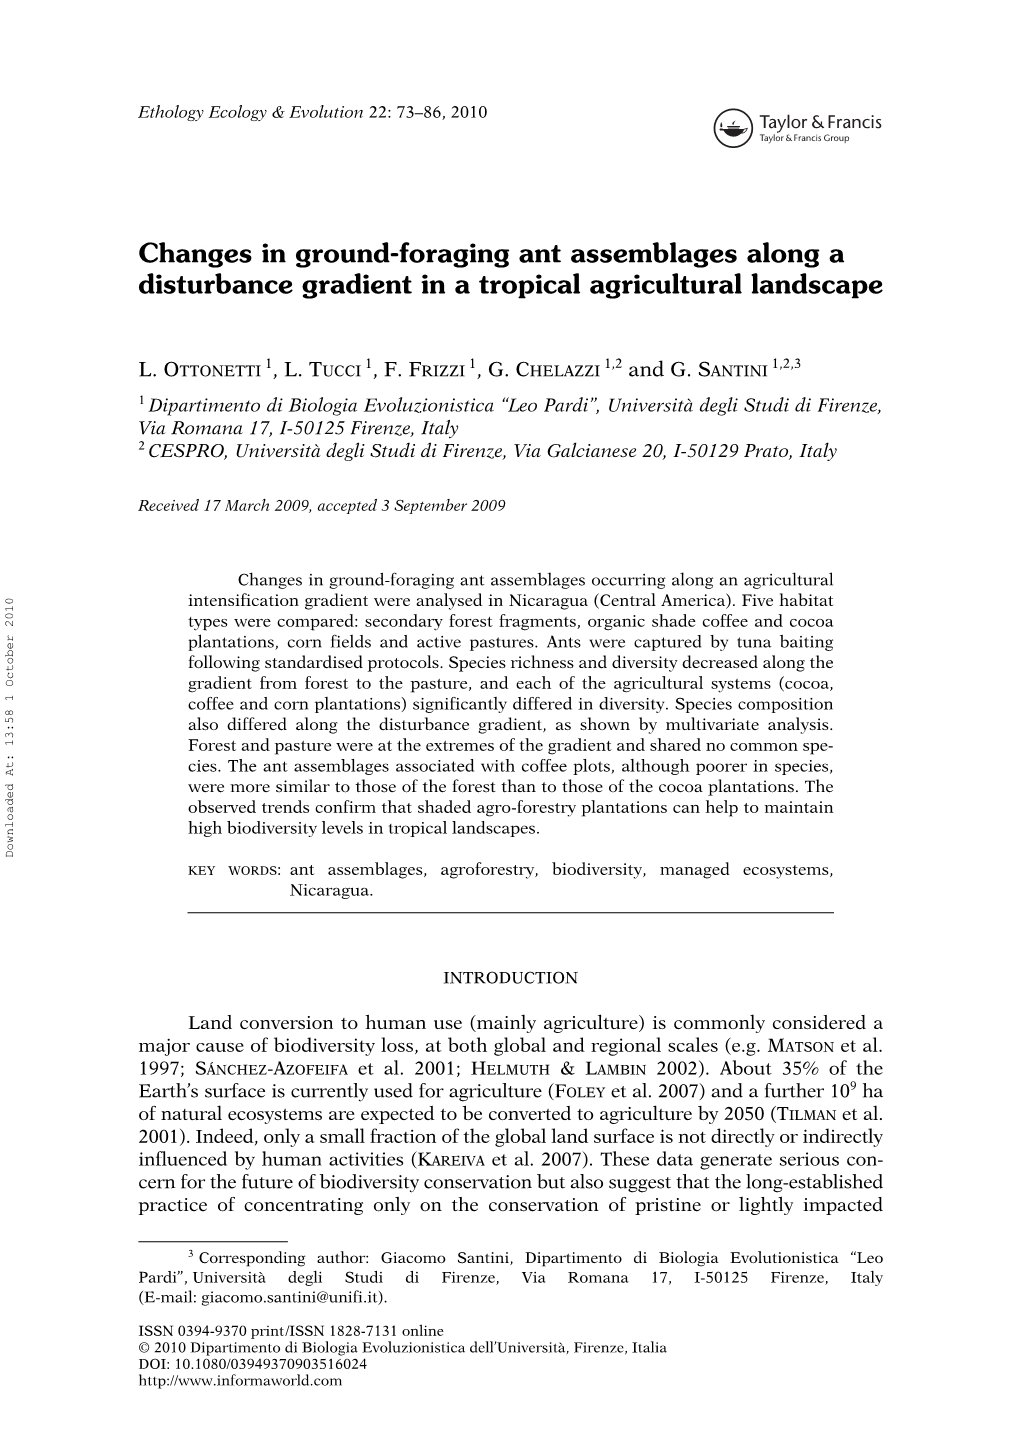 Changes in Ground-Foraging Ant Assemblages Along a Disturbance